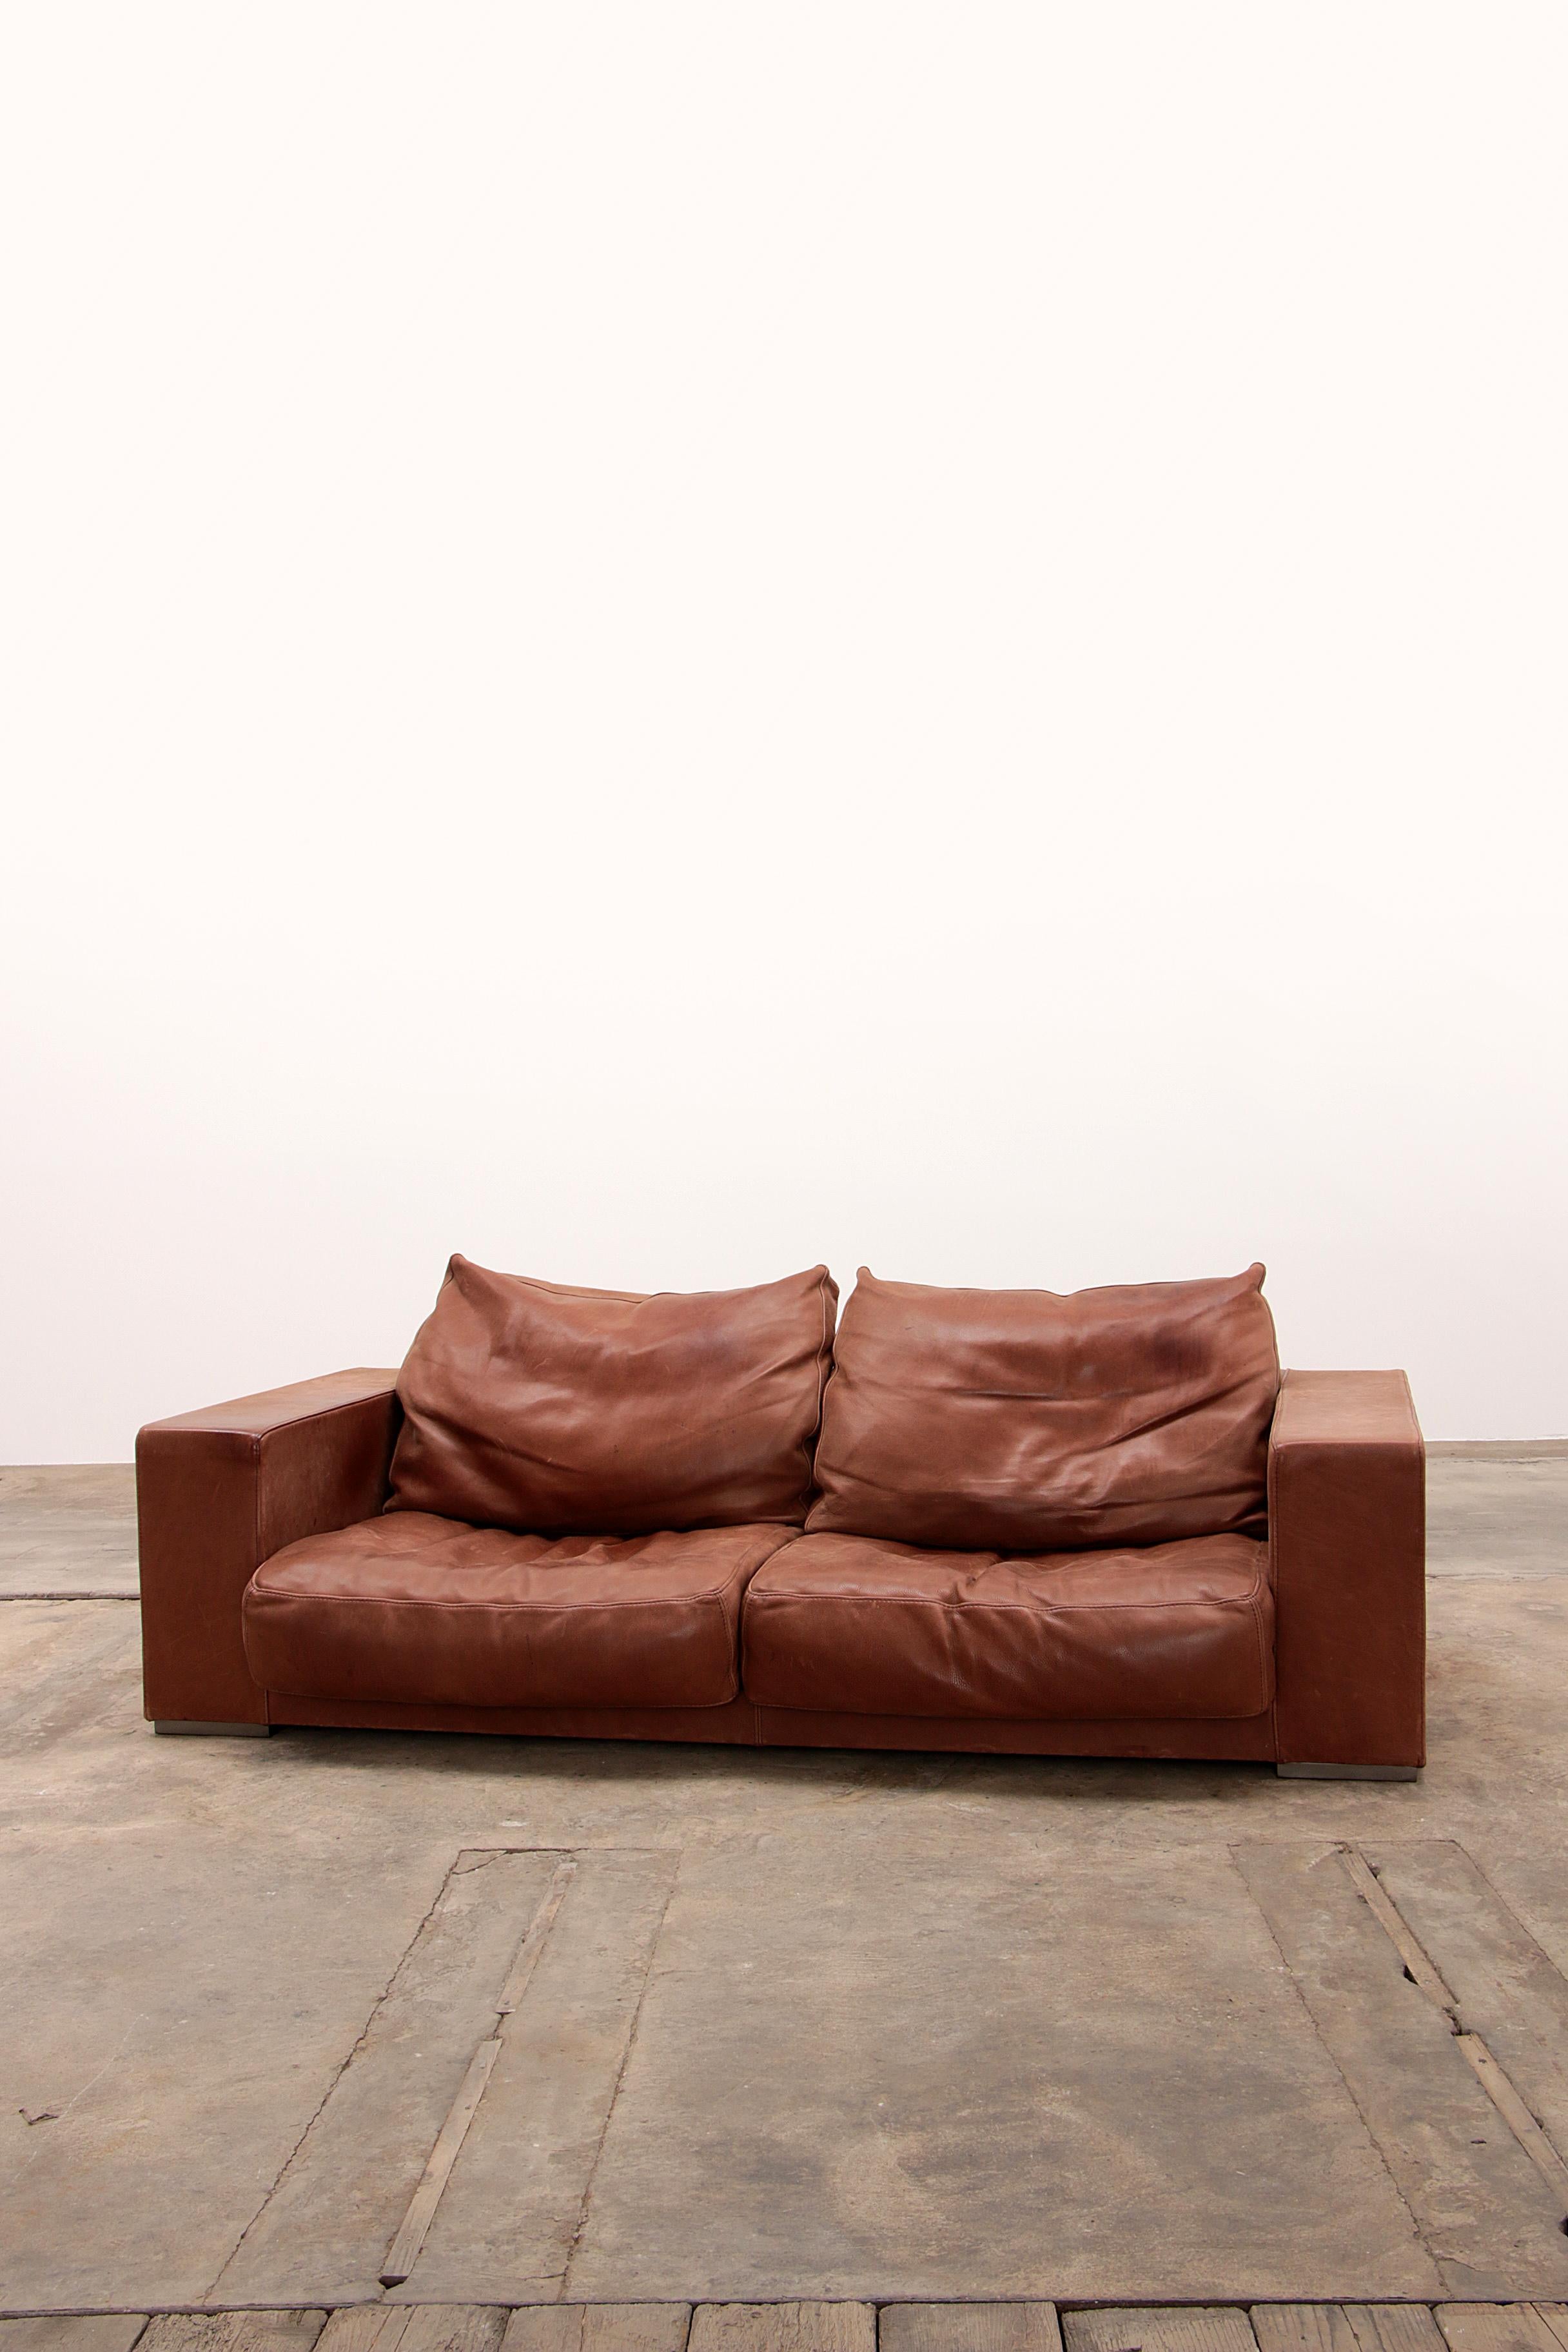 Vintage Sofa Cognac color Model Budapest design by Paola Navone by Baxter.

Has your eye fallen on this unique vintage design beautiful sleek lounge sofa. Material: beautiful supple natural bull leather. This sofa has an extremely comfortable